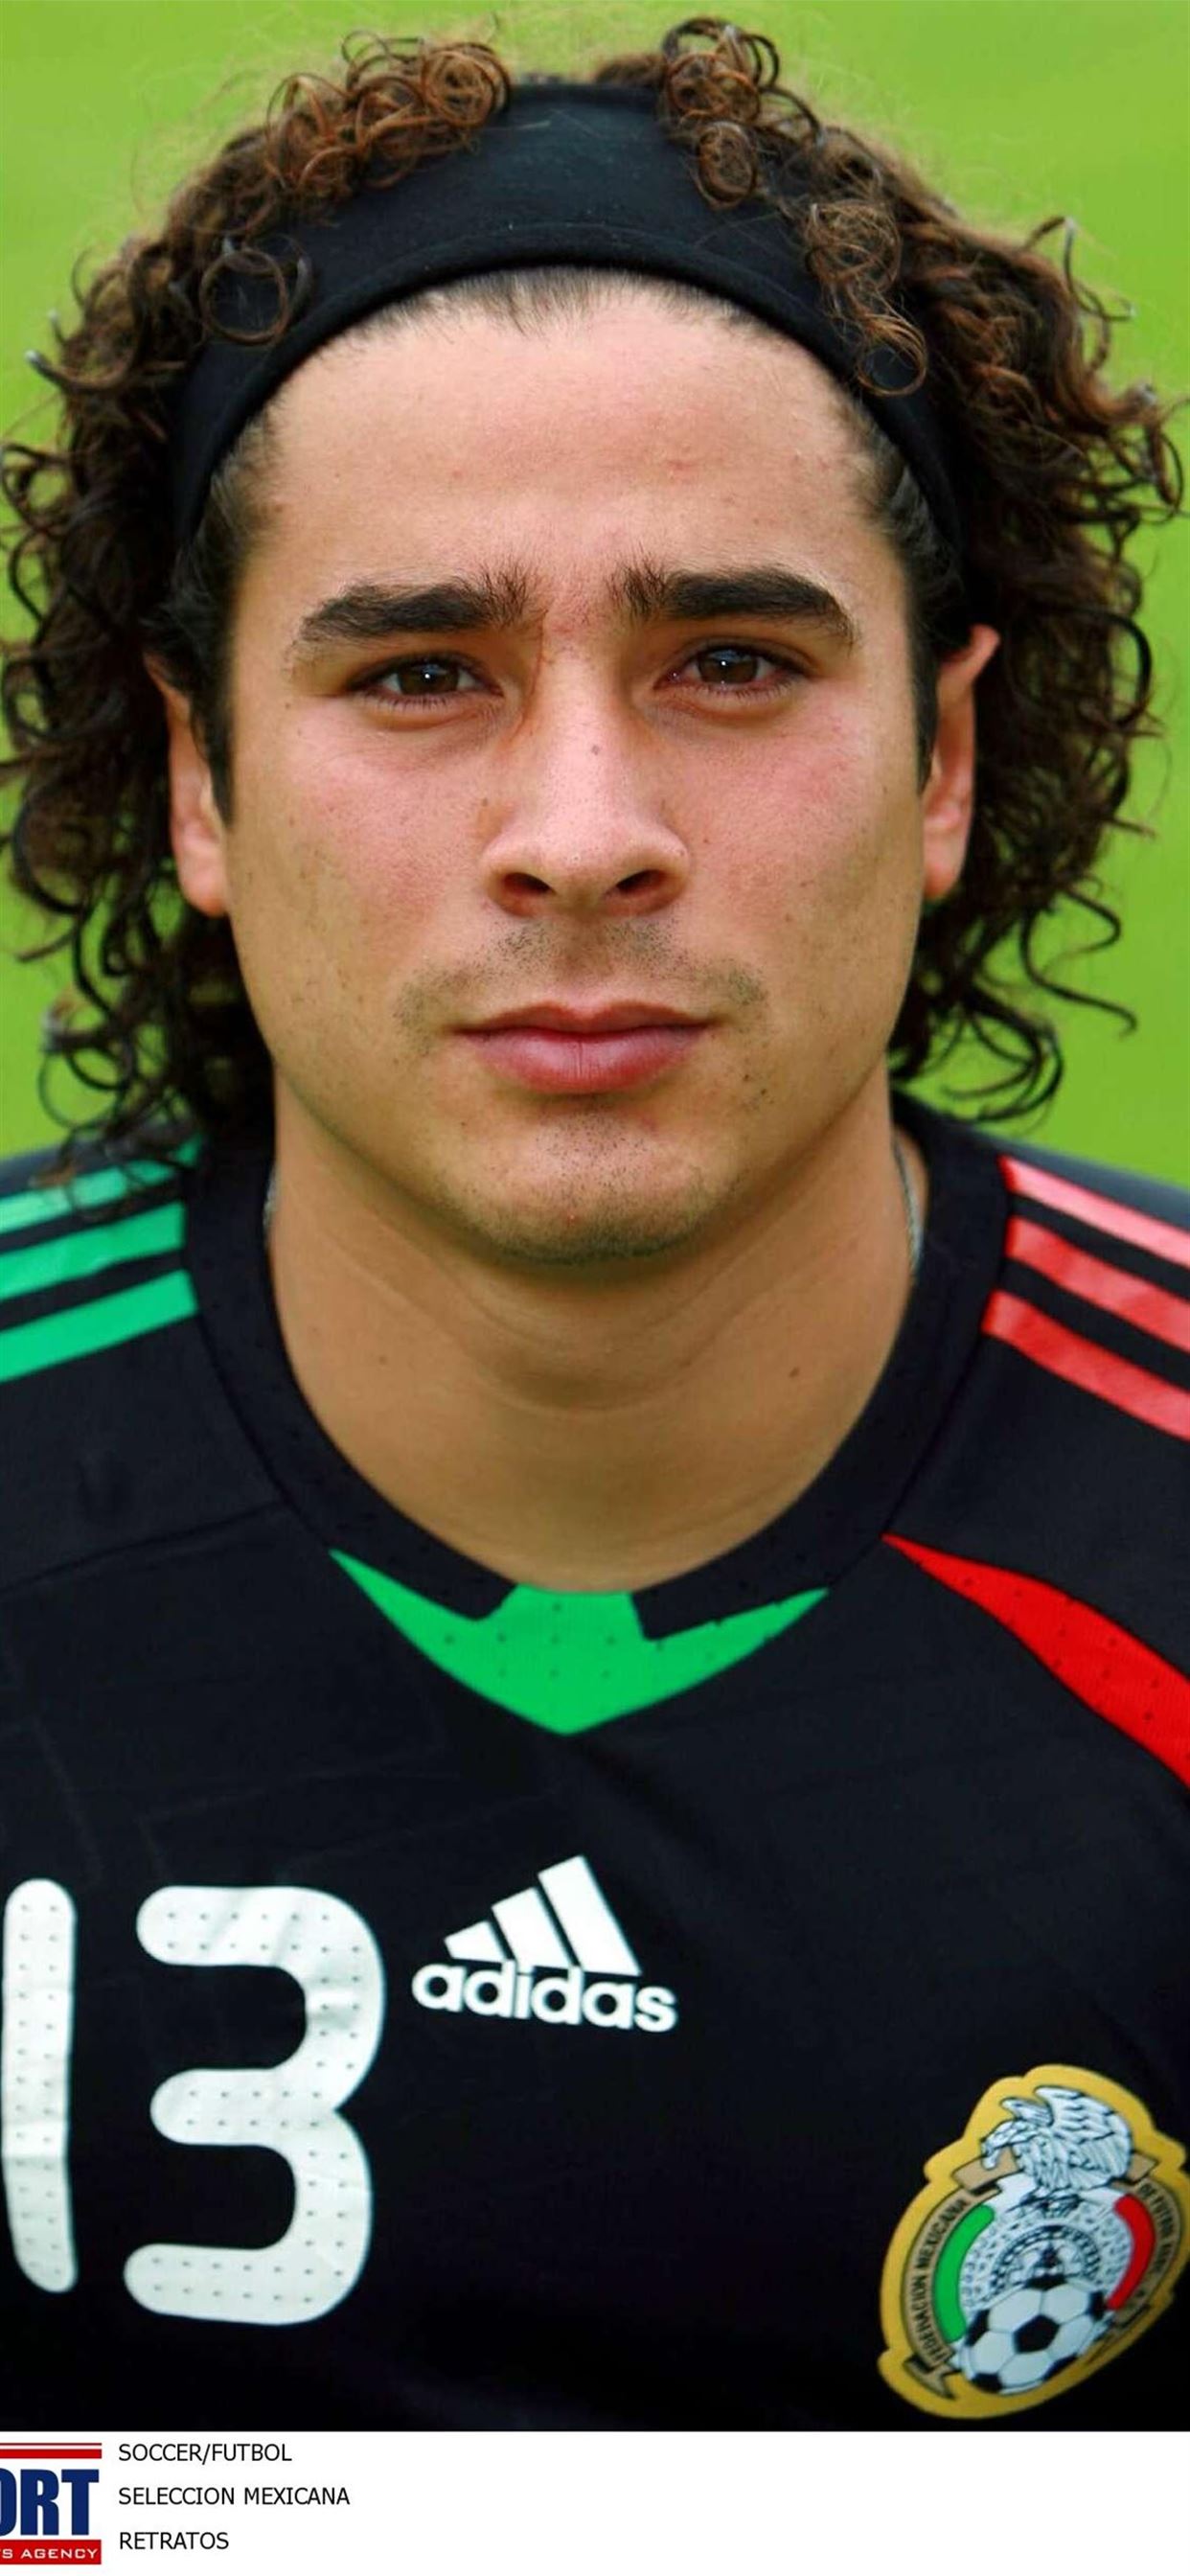 Guillermo ochoa on afari iphone wallpapers free download